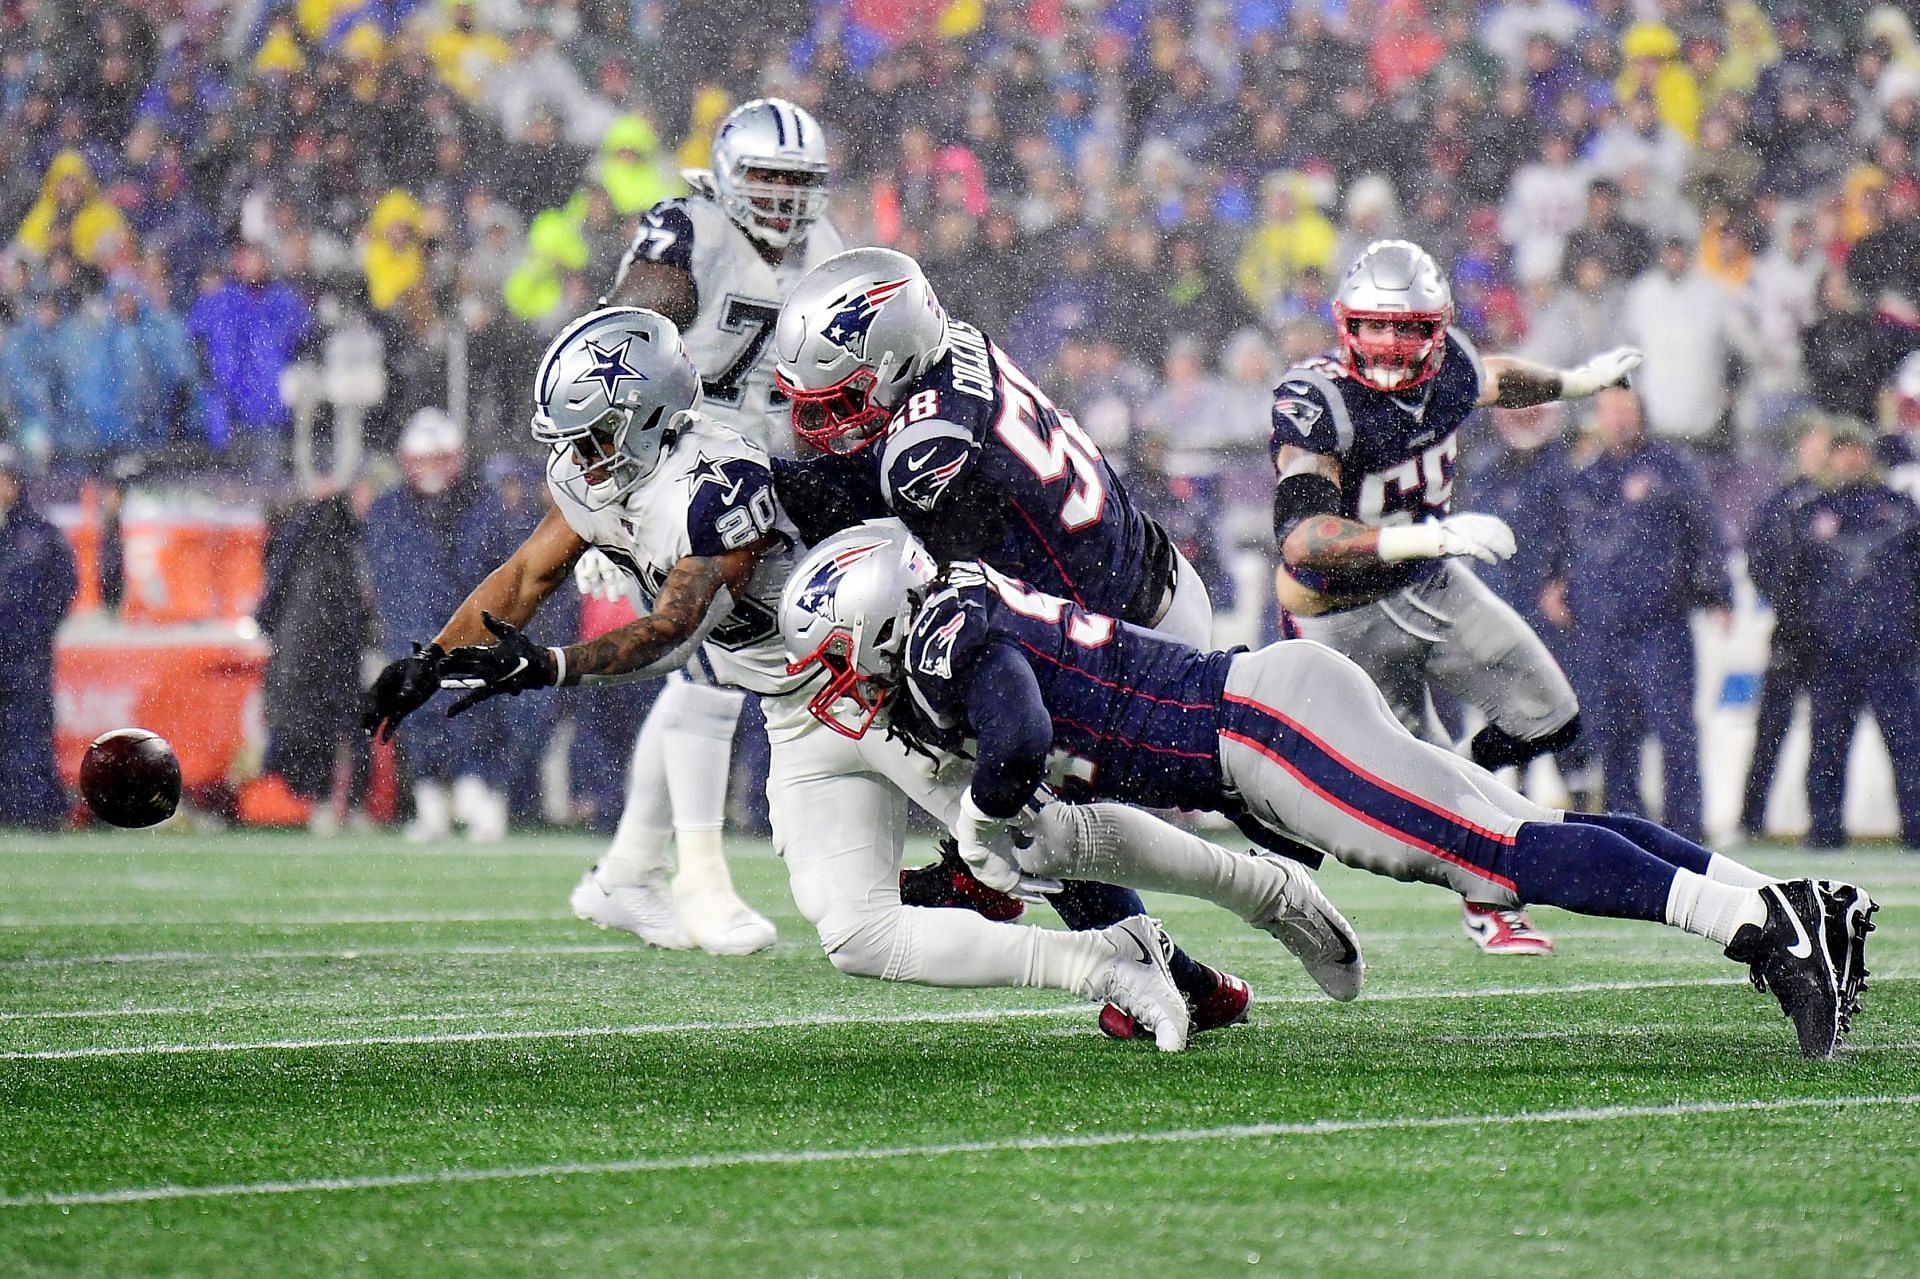 Collins (58) making a takedown during a November 2019 game (Photo: Getty)